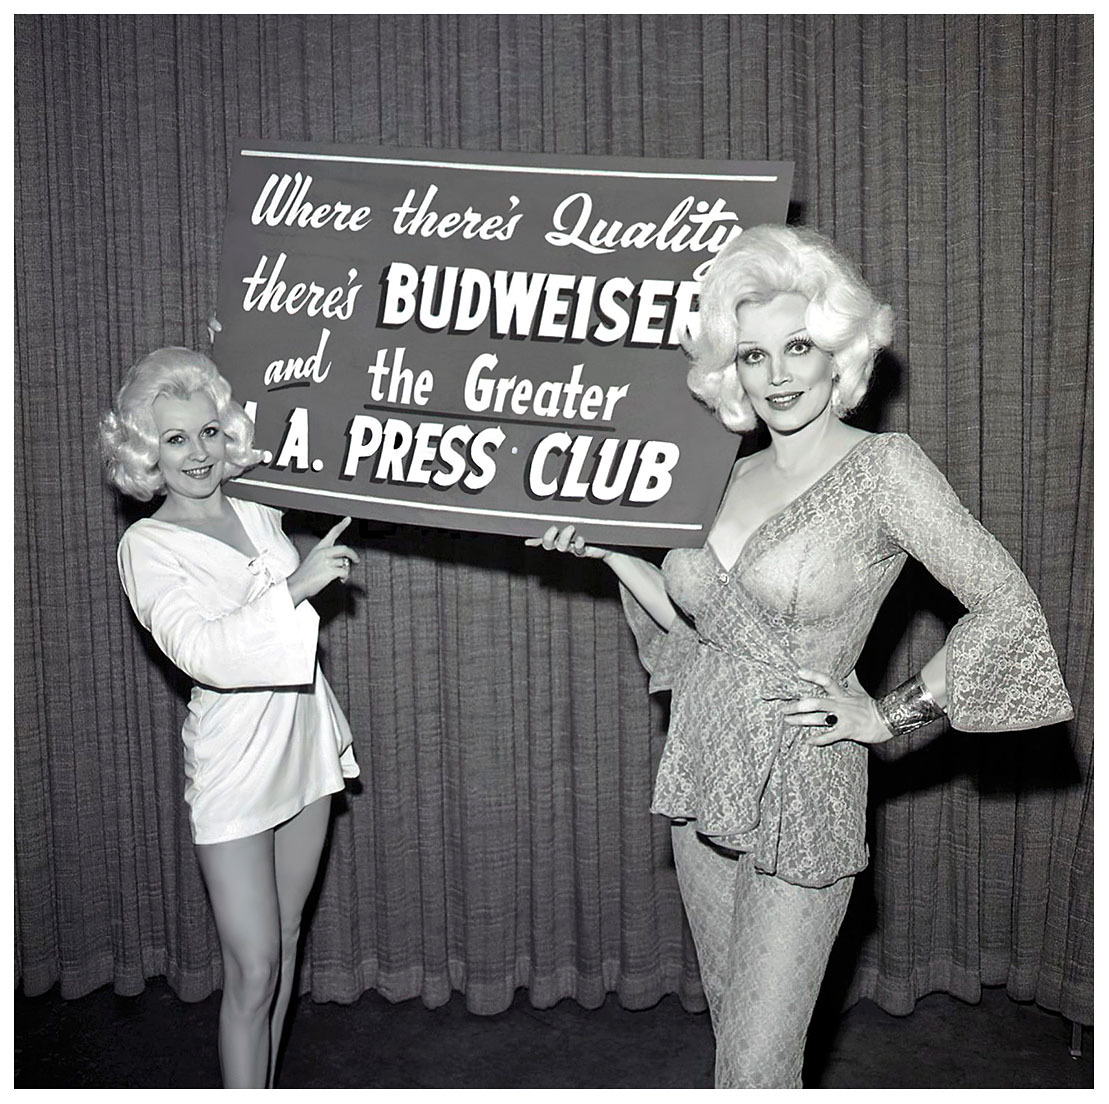 Liz Renay (at Right) and friend pose for photos promoting the L.A. Press Club.. A